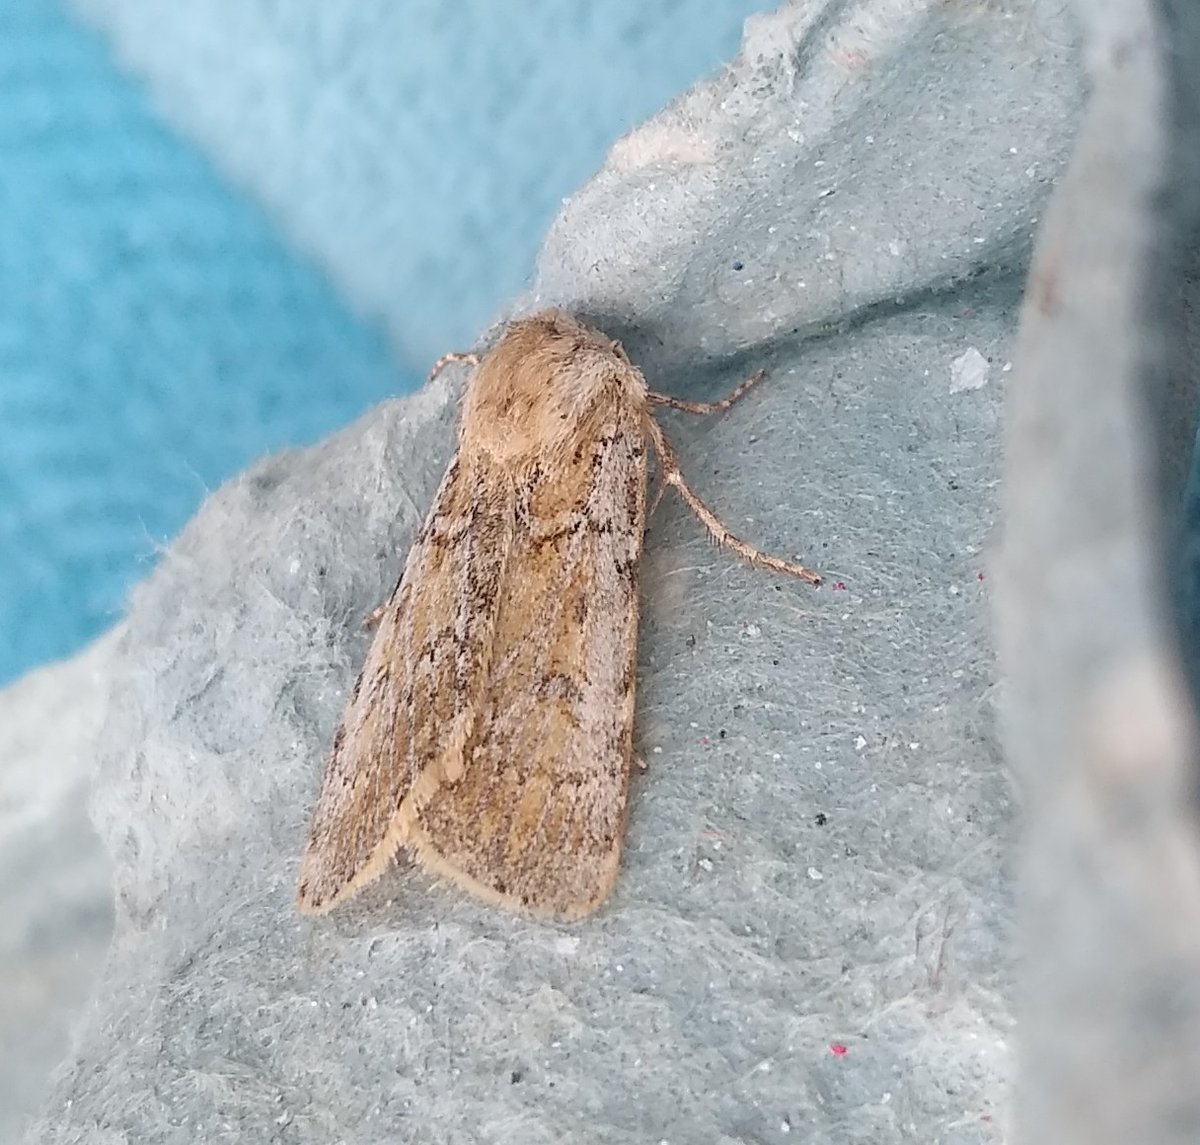 An odd record for Ruckinge last night was this Sand Dart, only the second inland record for Kent